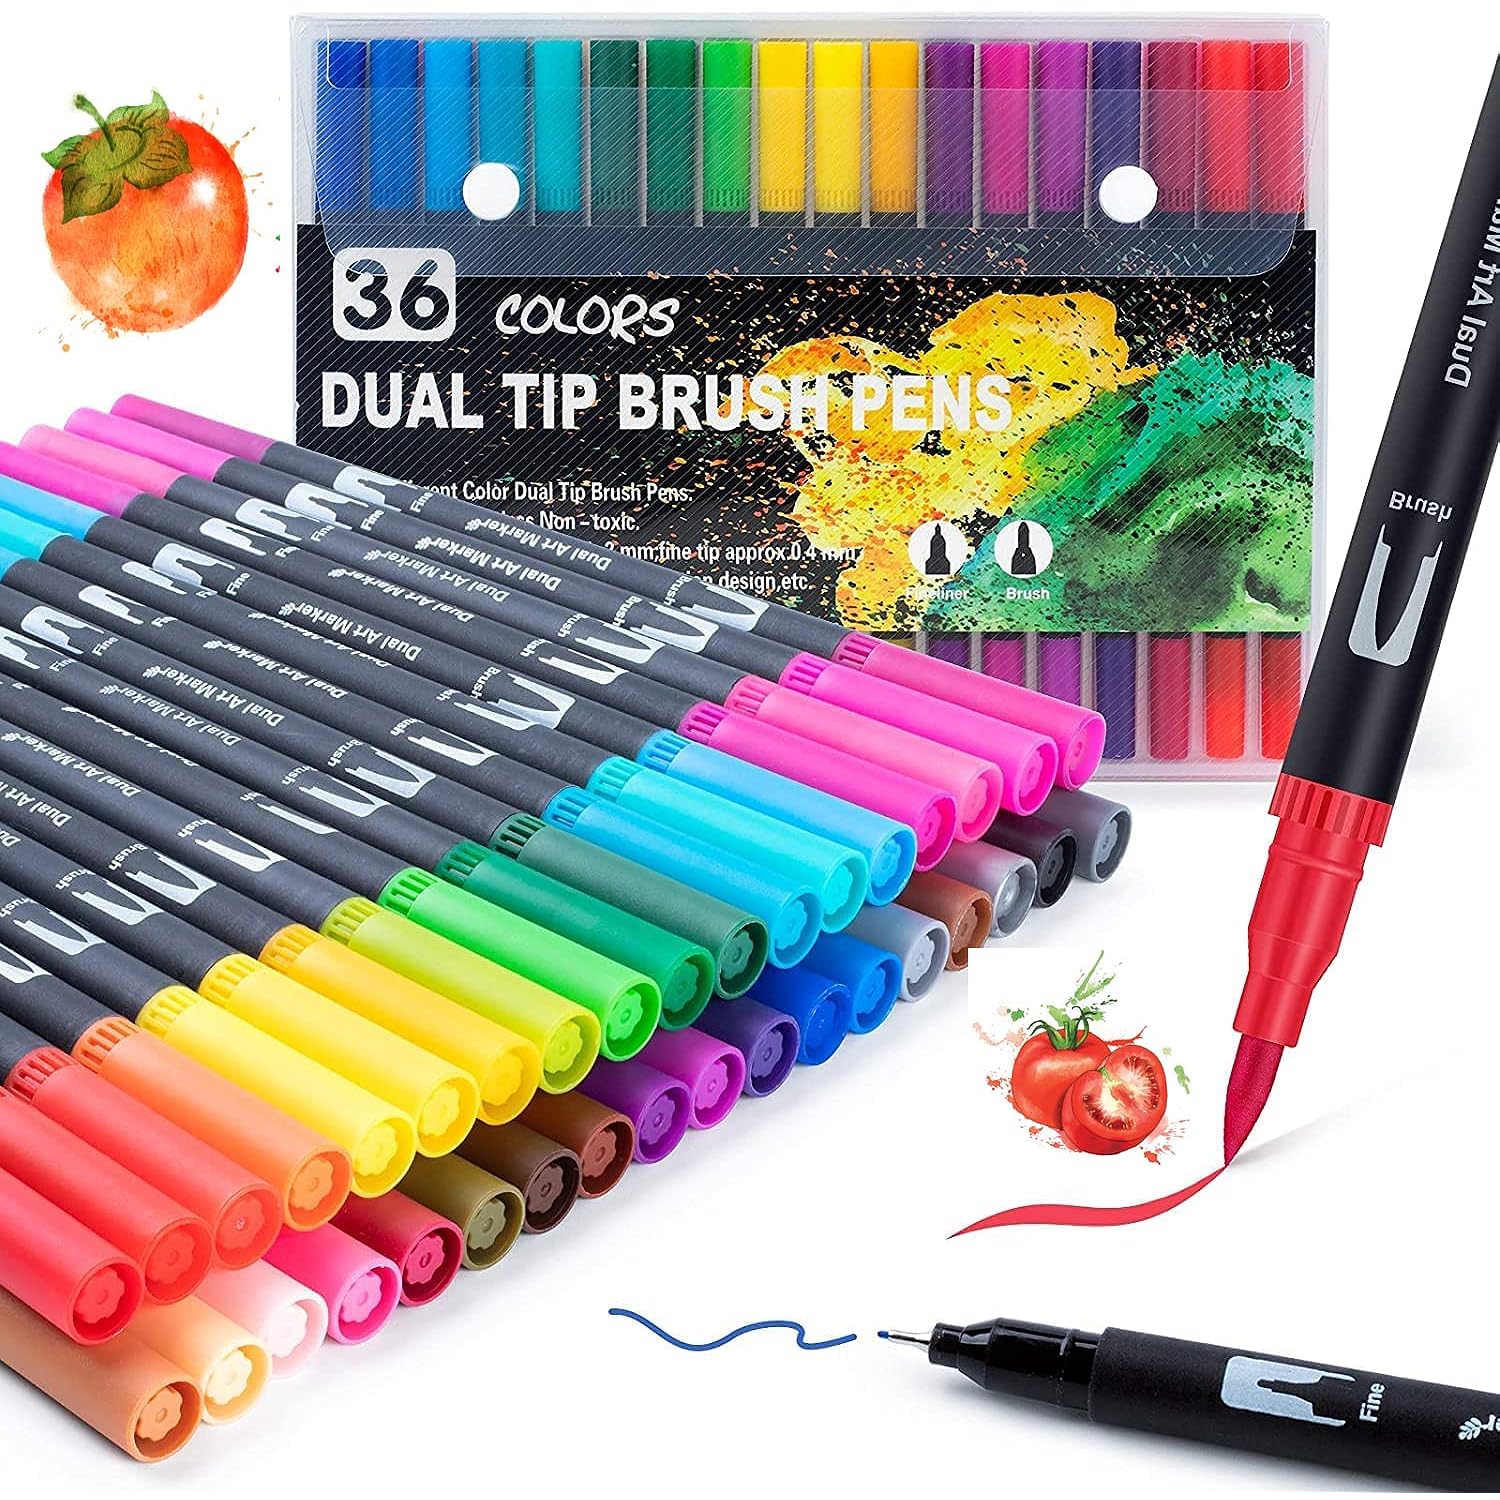 36 Fine Felt Tip Dual Brush Coloring Markers for Adults and Kids - Perfect for Painting, Lettering, Card Making, Crafts, Doodling, Bullet Journals, and Scrapbooking